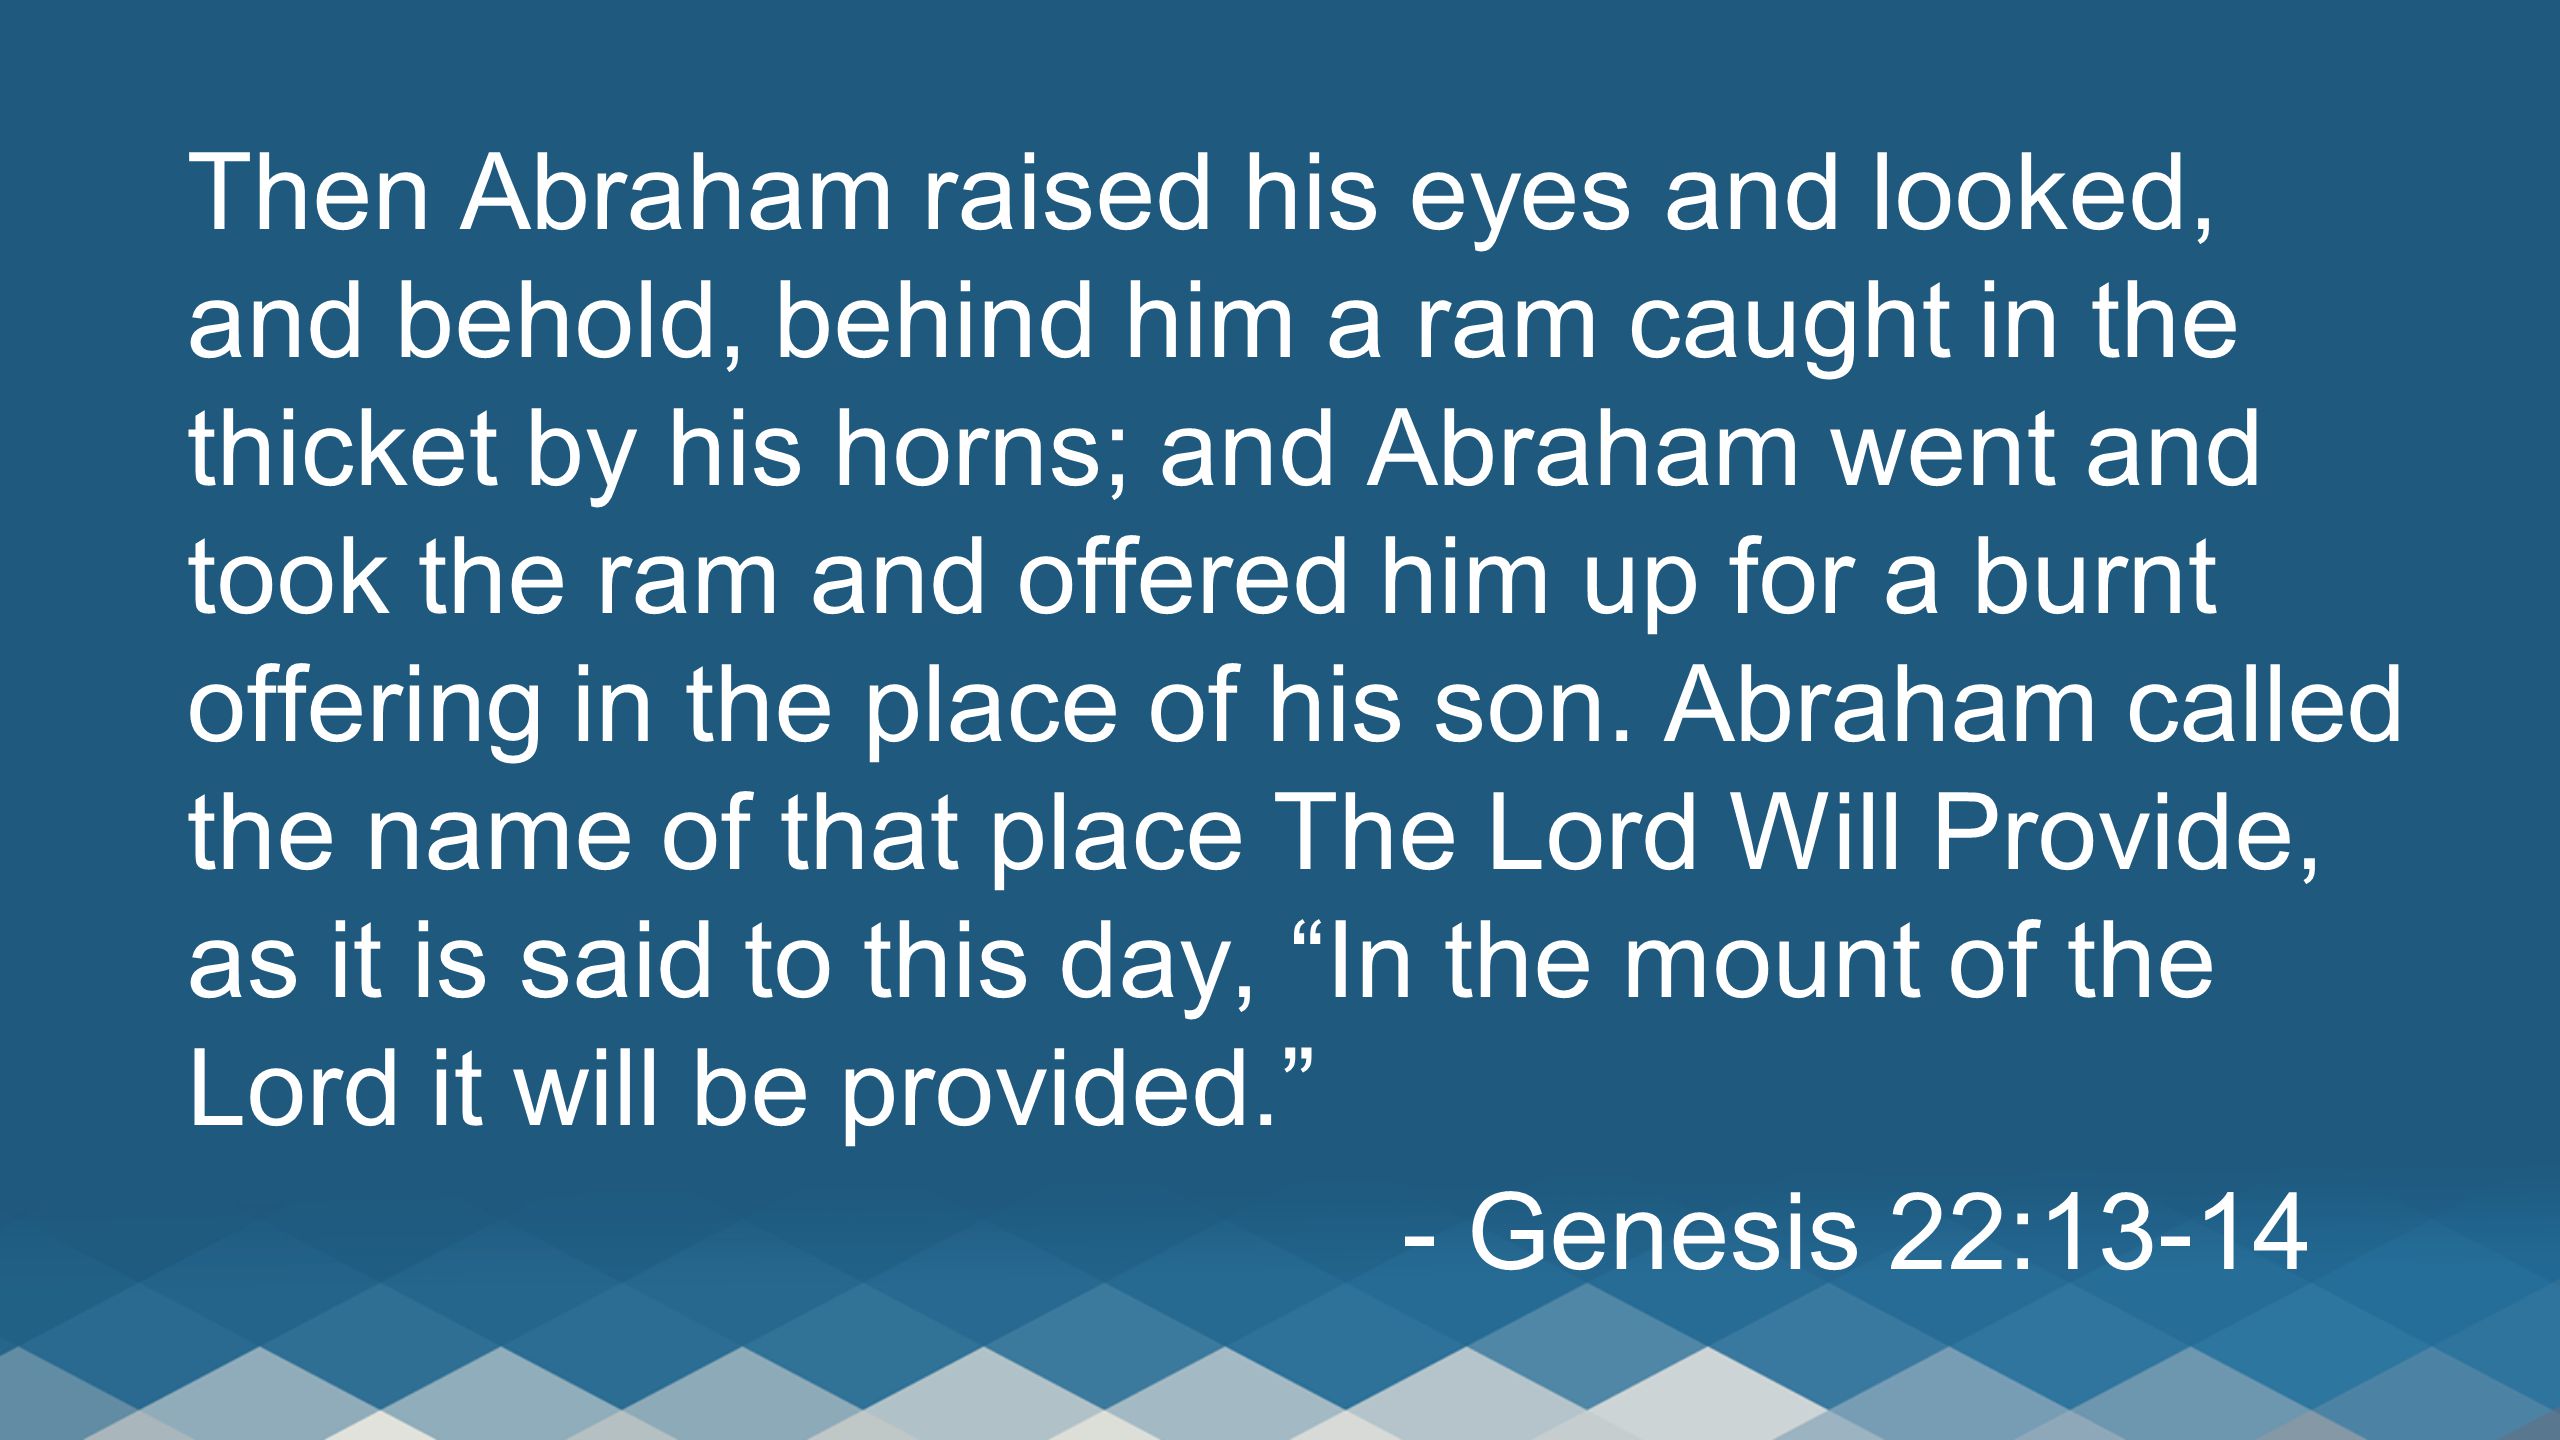 Then Abraham raised his eyes and looked, and behold, behind him a ram caught in the thicket by his horns; and Abraham went and took the ram and offered him up for a burnt offering in the place of his son.